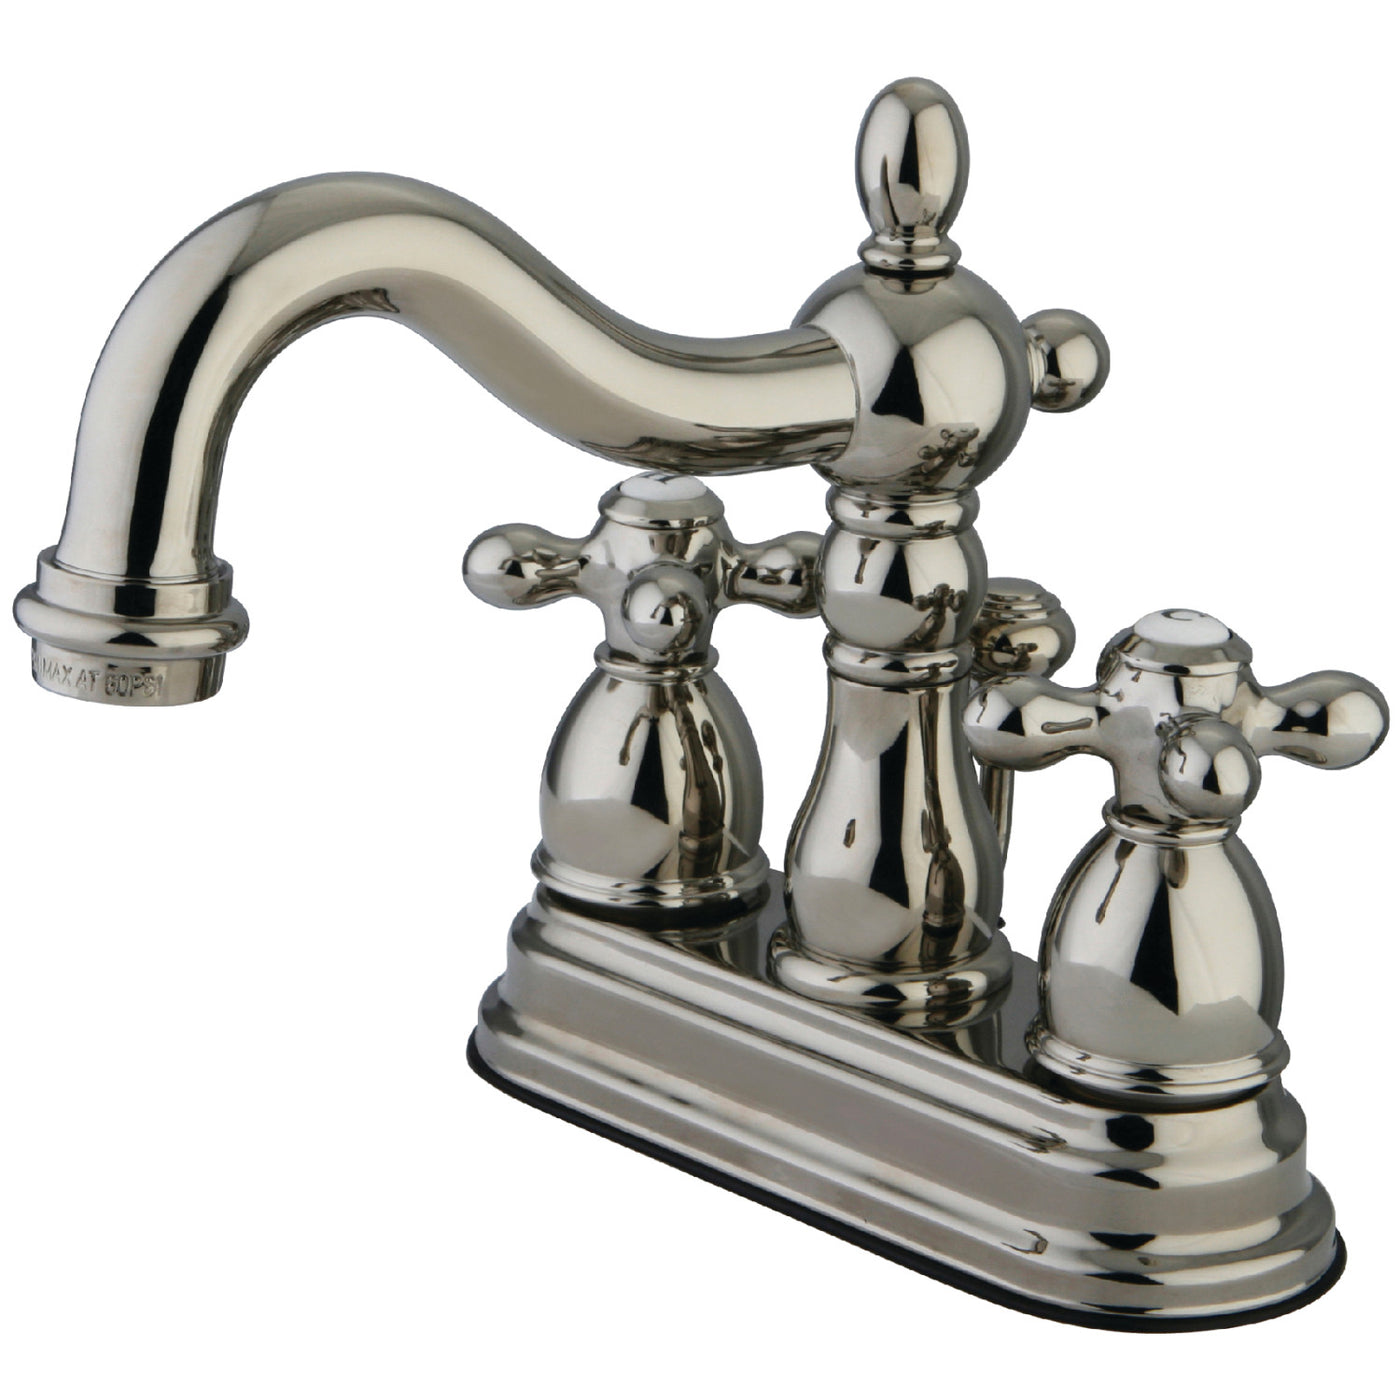 Elements of Design EB1606AX 4-Inch Centerset Bathroom Faucet with Plastic Pop-Up, Polished Nickel